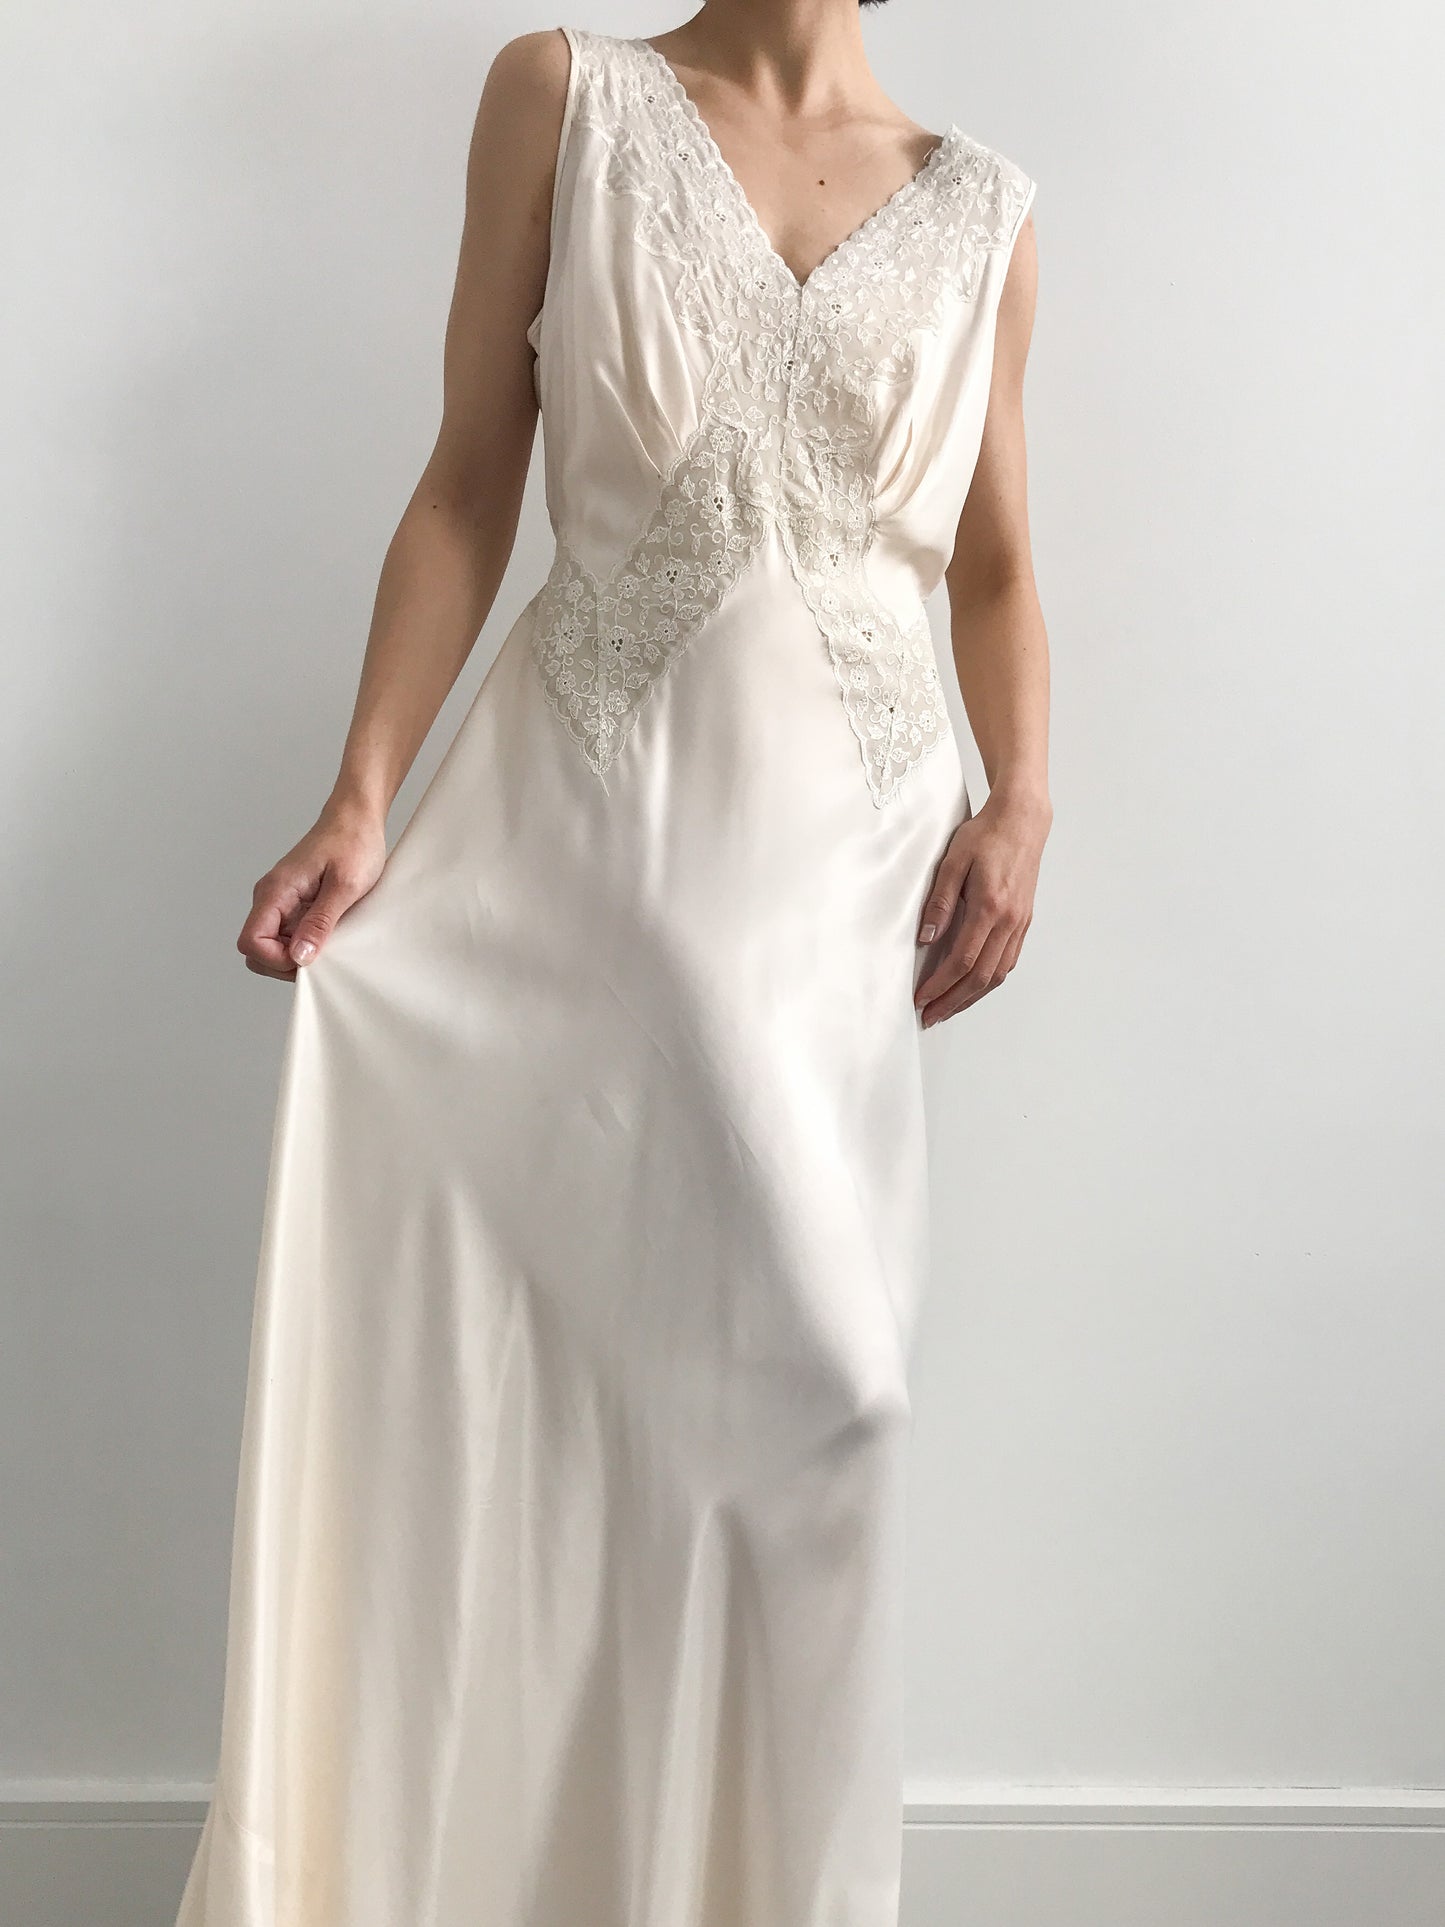 1930s Ivory Satin and Lace Slip Gown